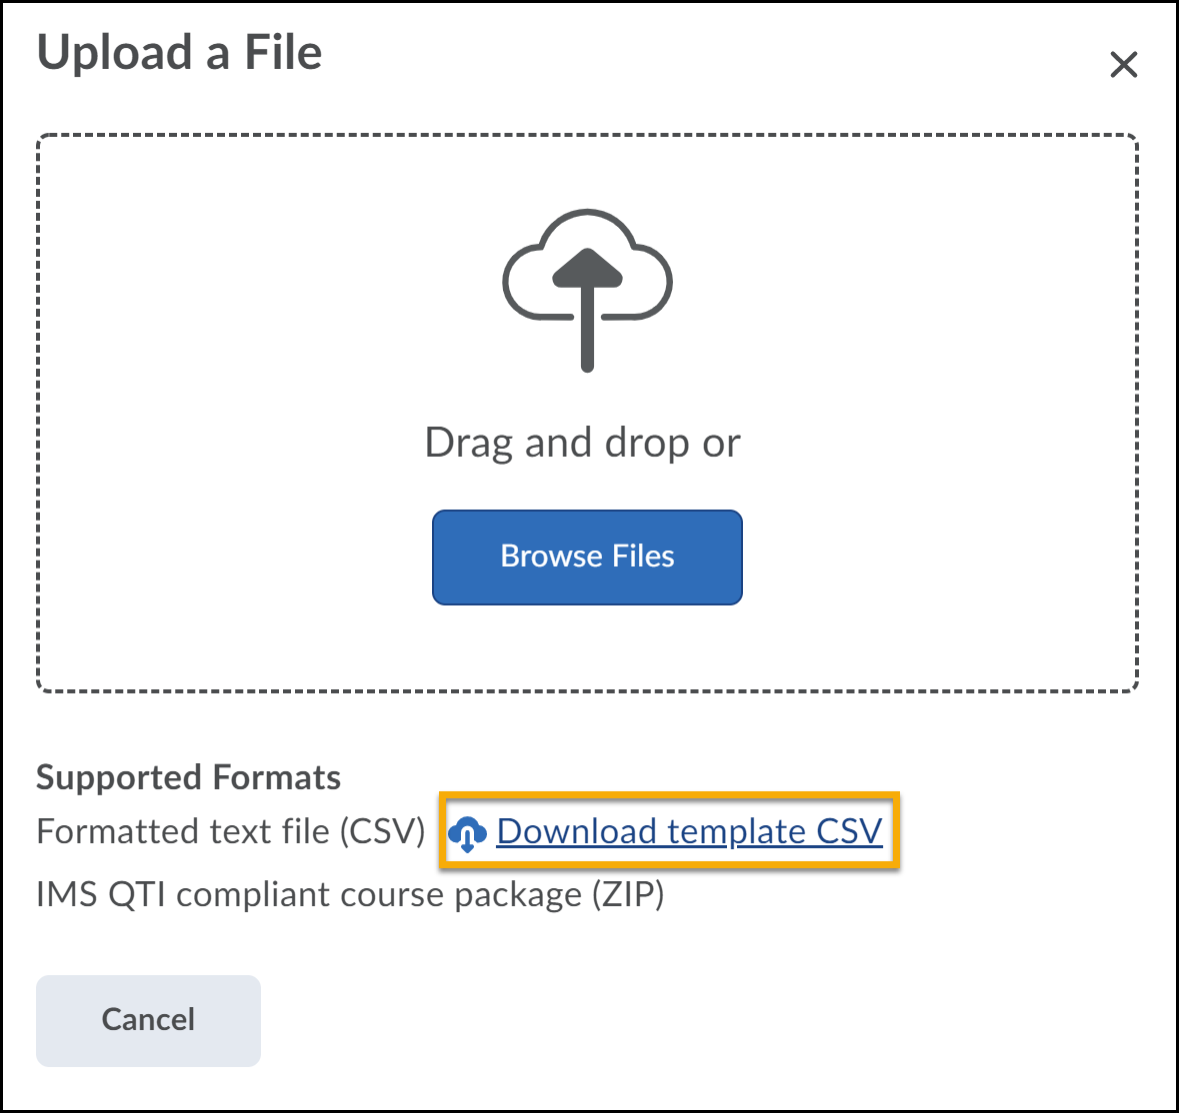 Drag and drop window open. Under Support Formats, Download template CSV highlighted.